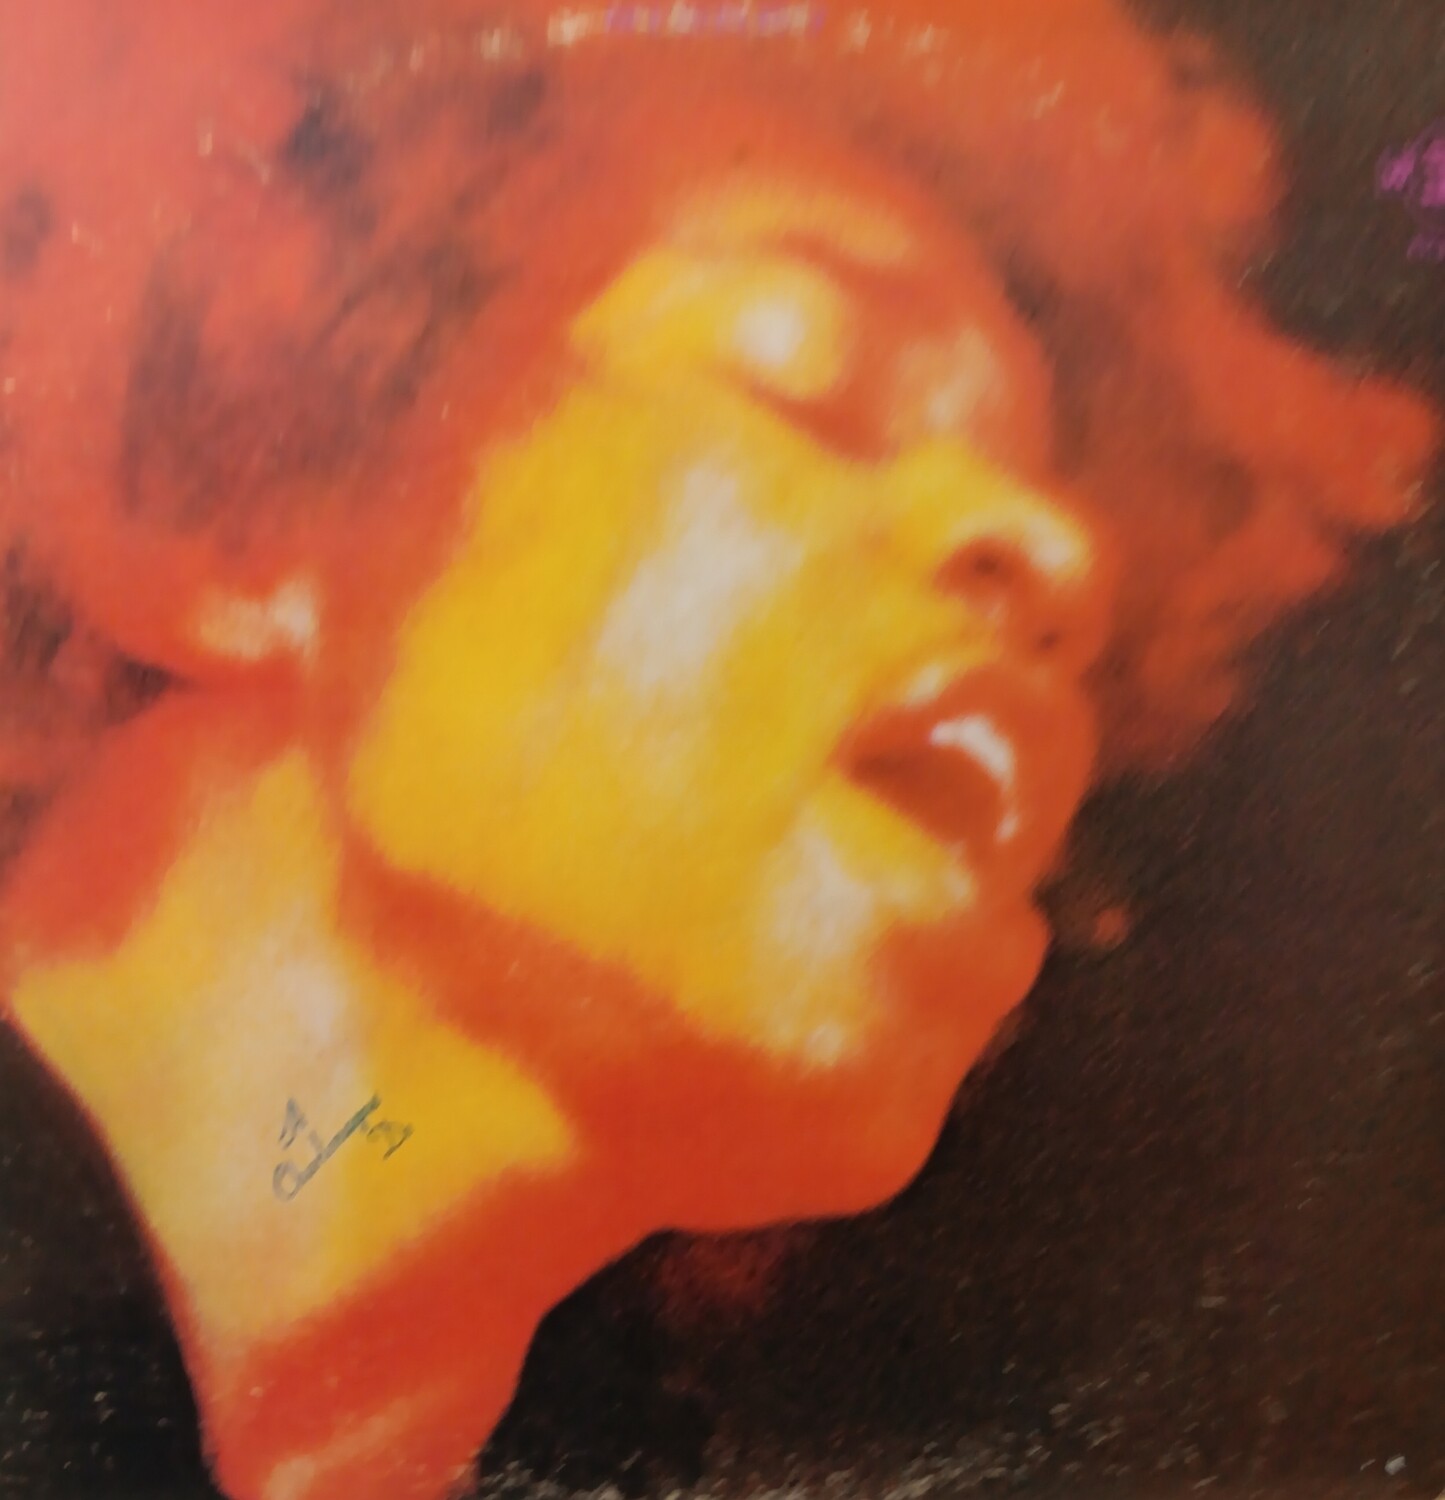 JIMI HENDRIX EXPERIENCE - Electric Ladyland